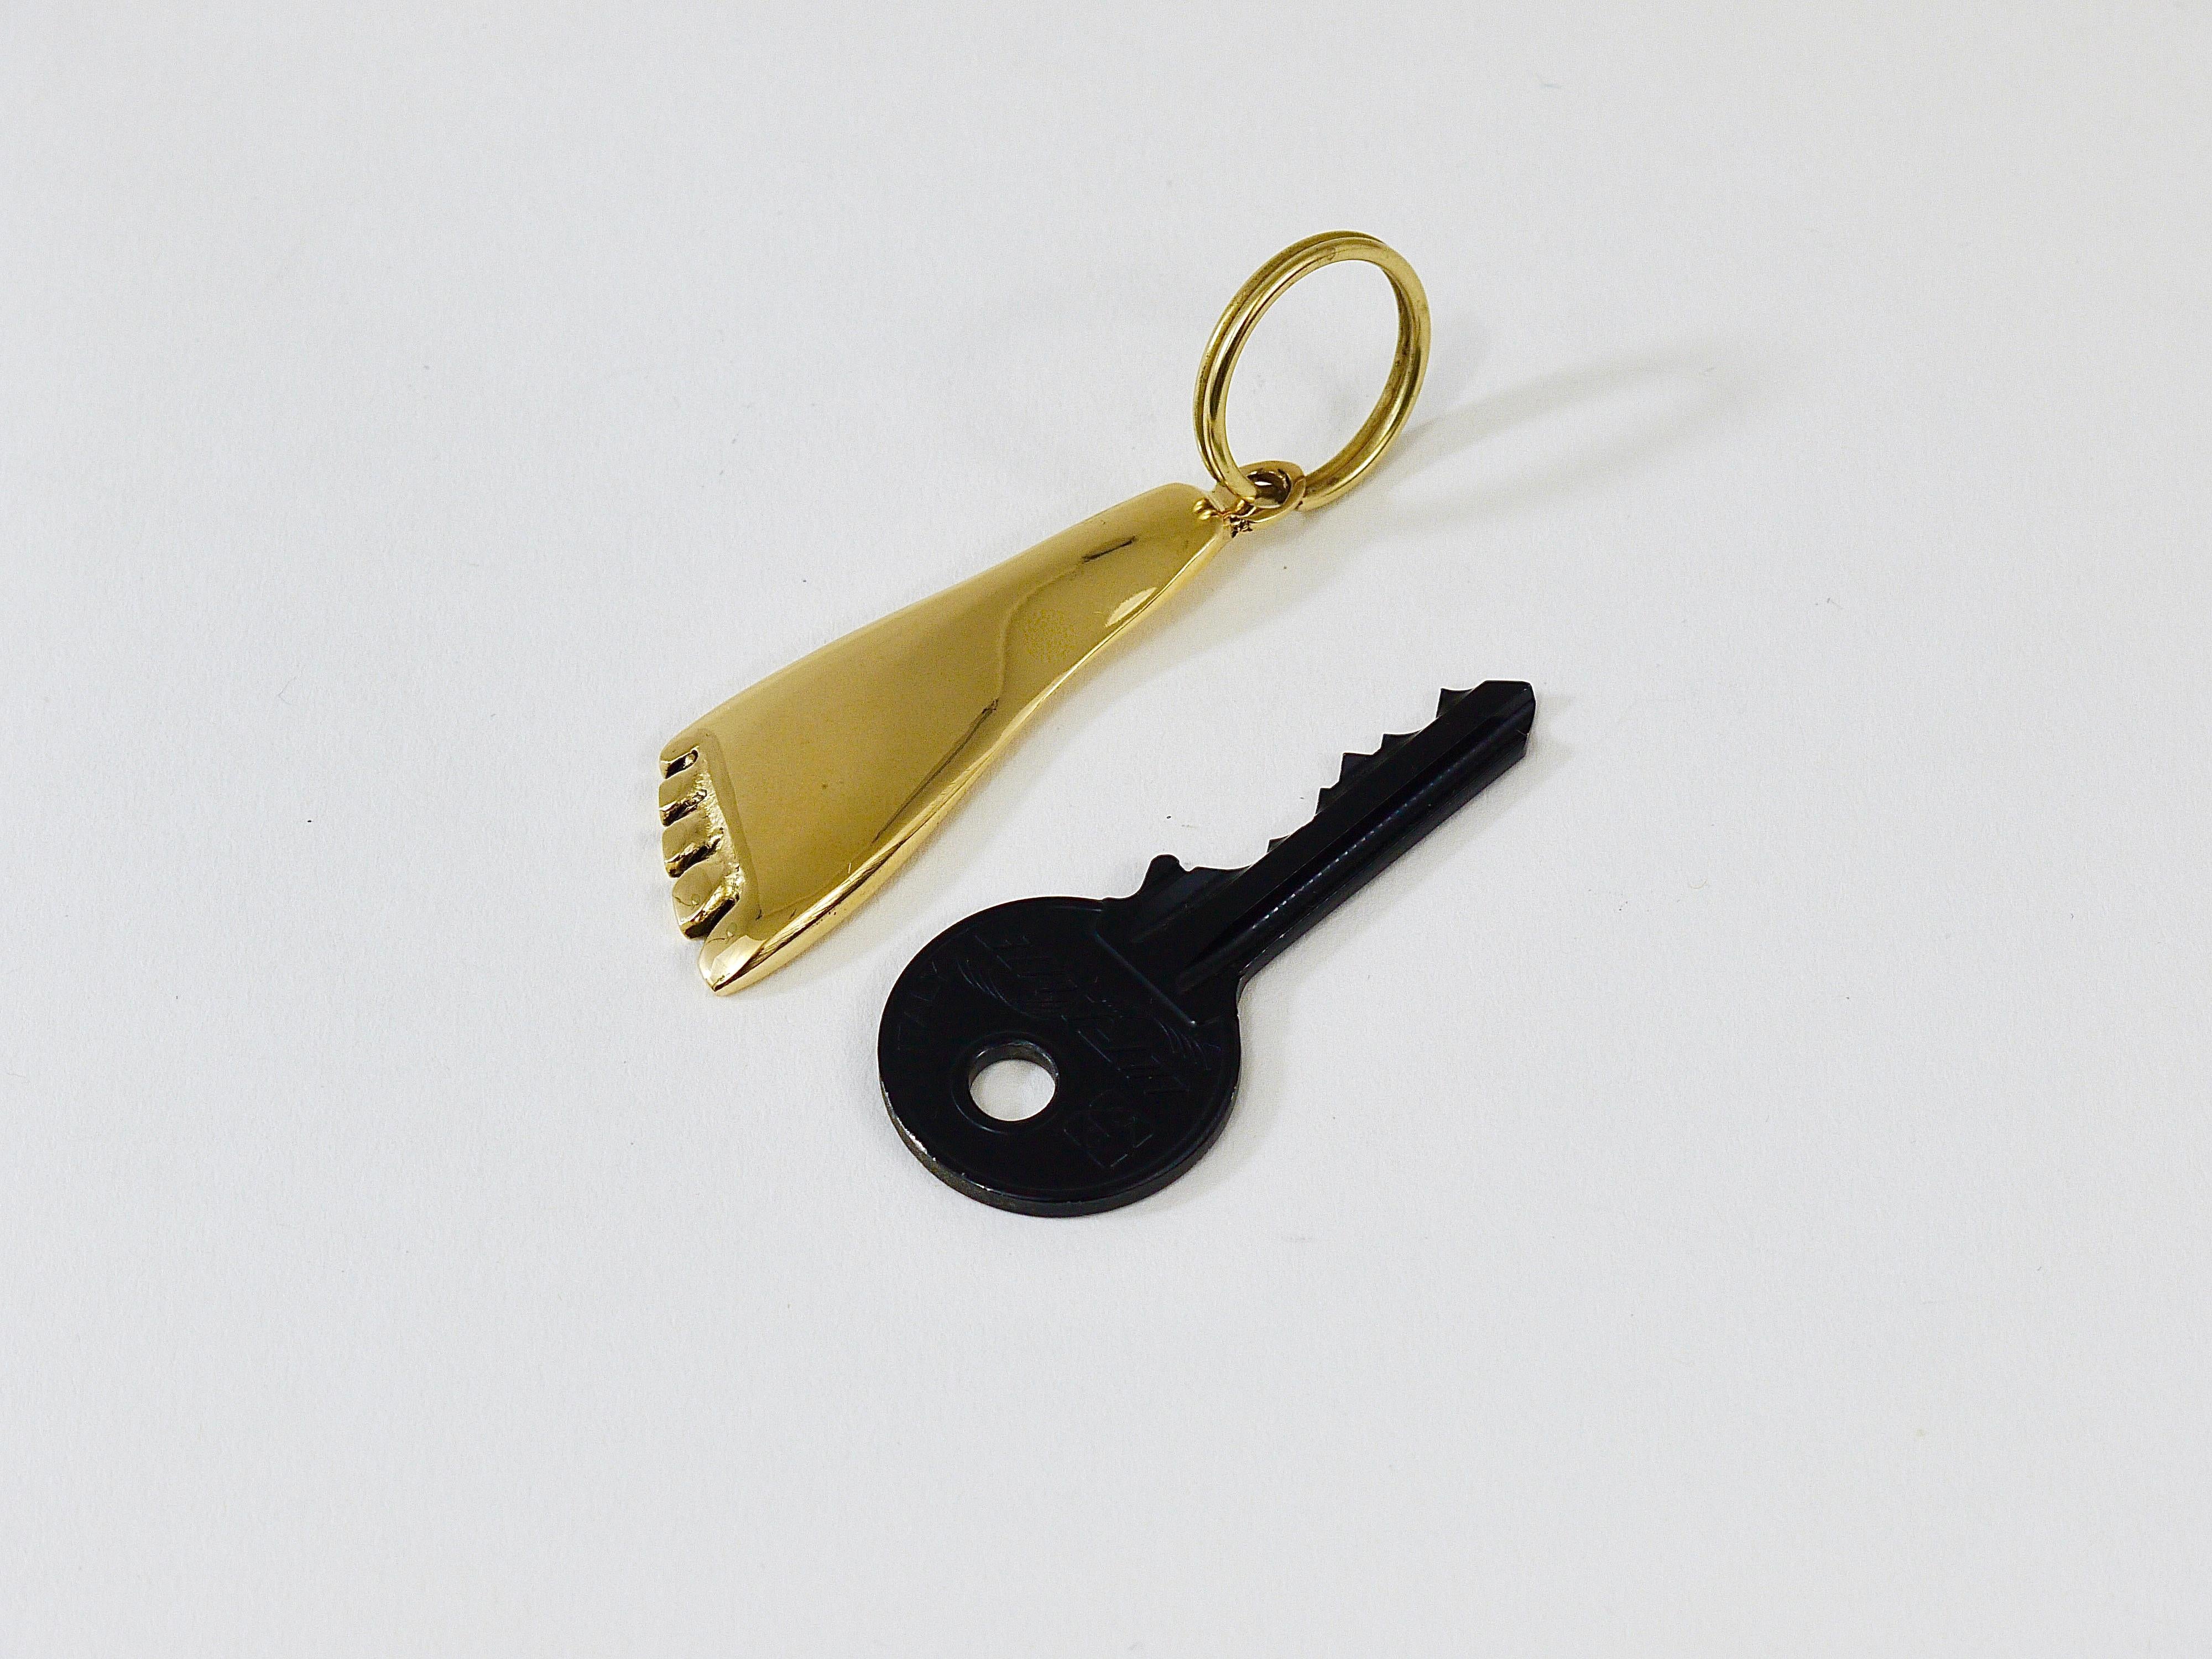 Mid-Century Modern Carl Auböck Handcrafted Midcentury Foot Brass Figurine Key Ring Chain Holder For Sale